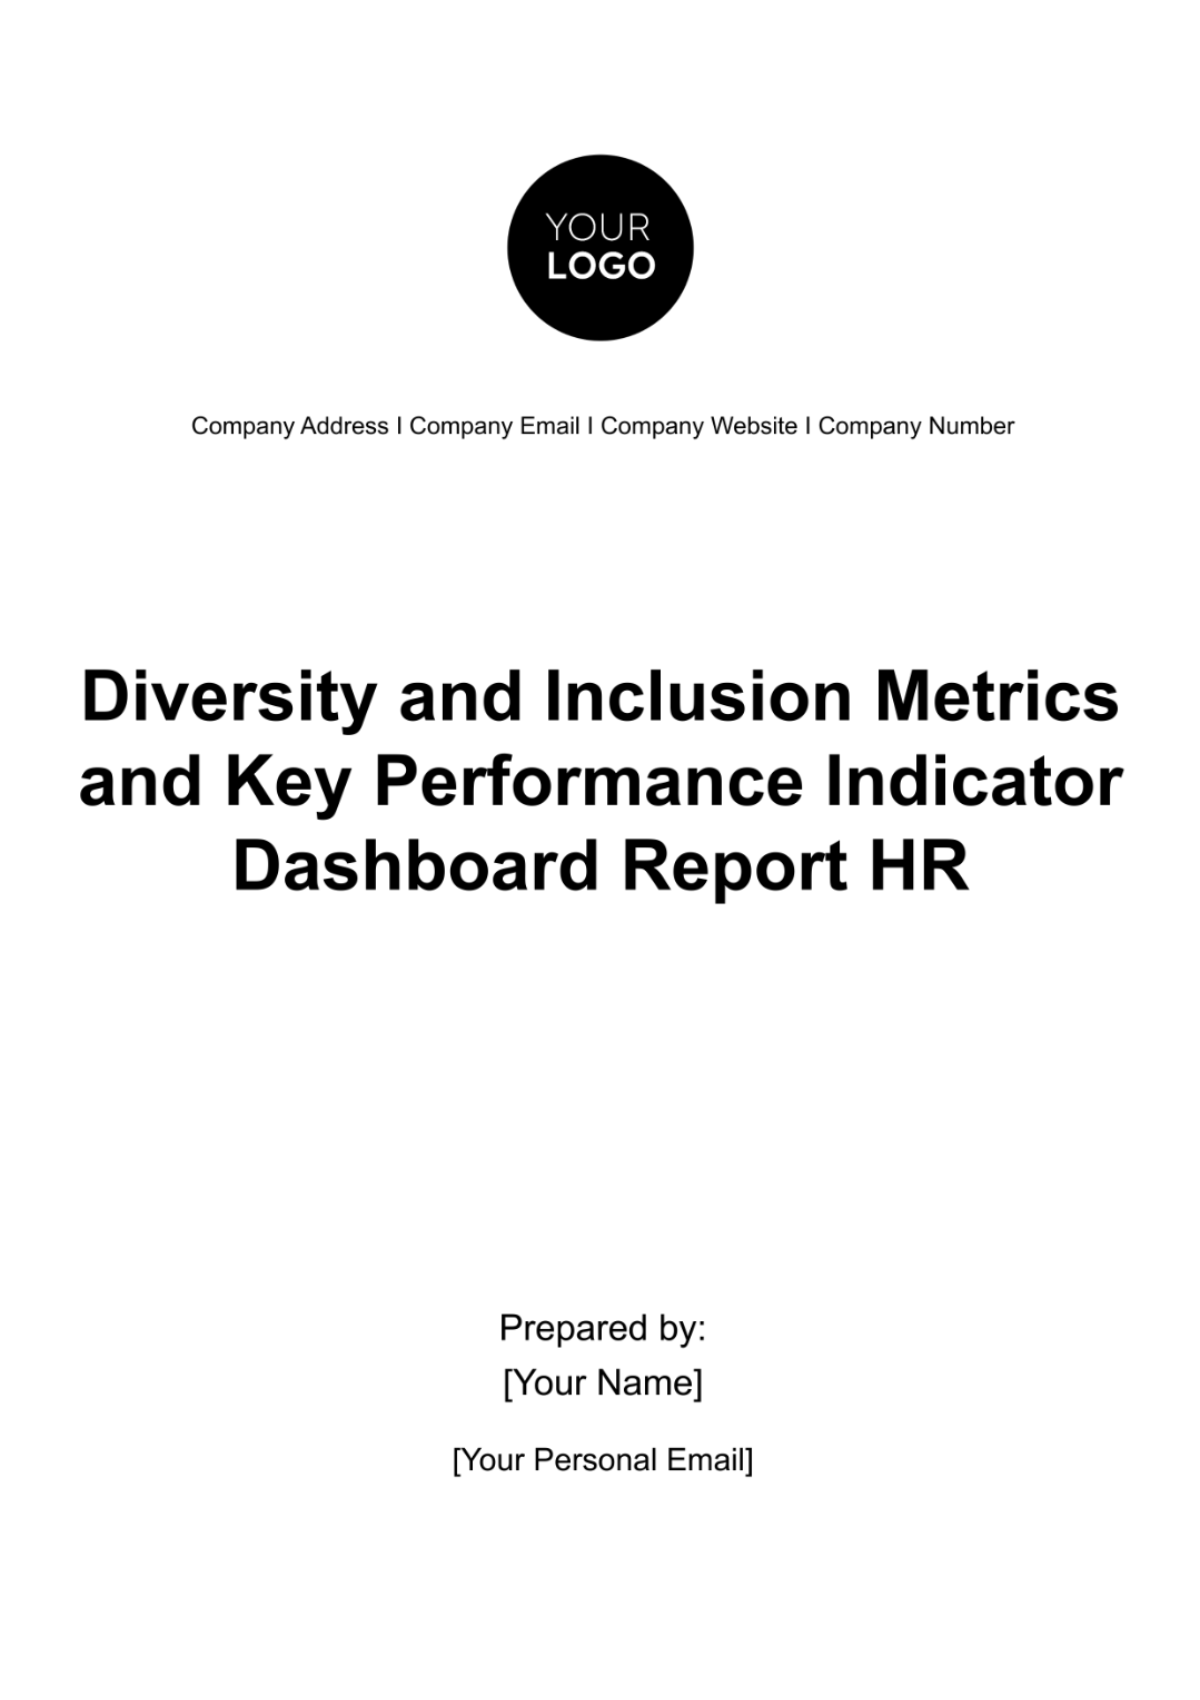 Free Diversity and Inclusion Metrics and Key Performance Indicator Dashboard Report HR Template